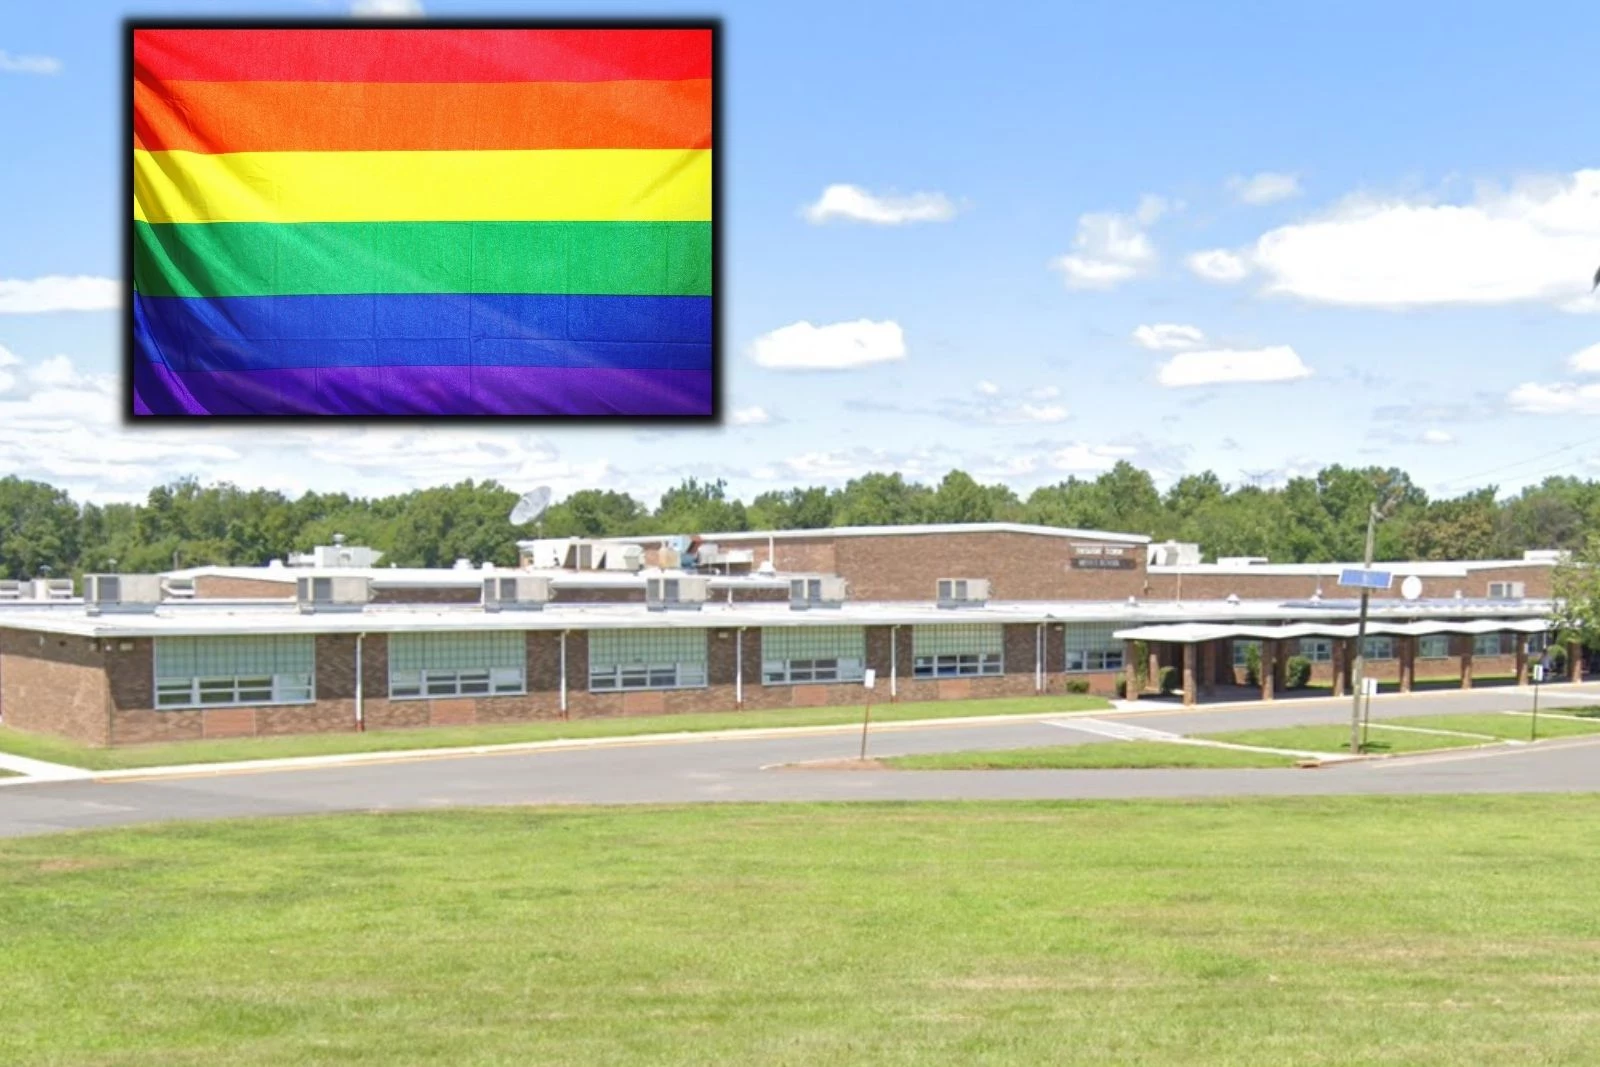 Piscataway, NJ counselor fired over LGBTQ issues, supporters image